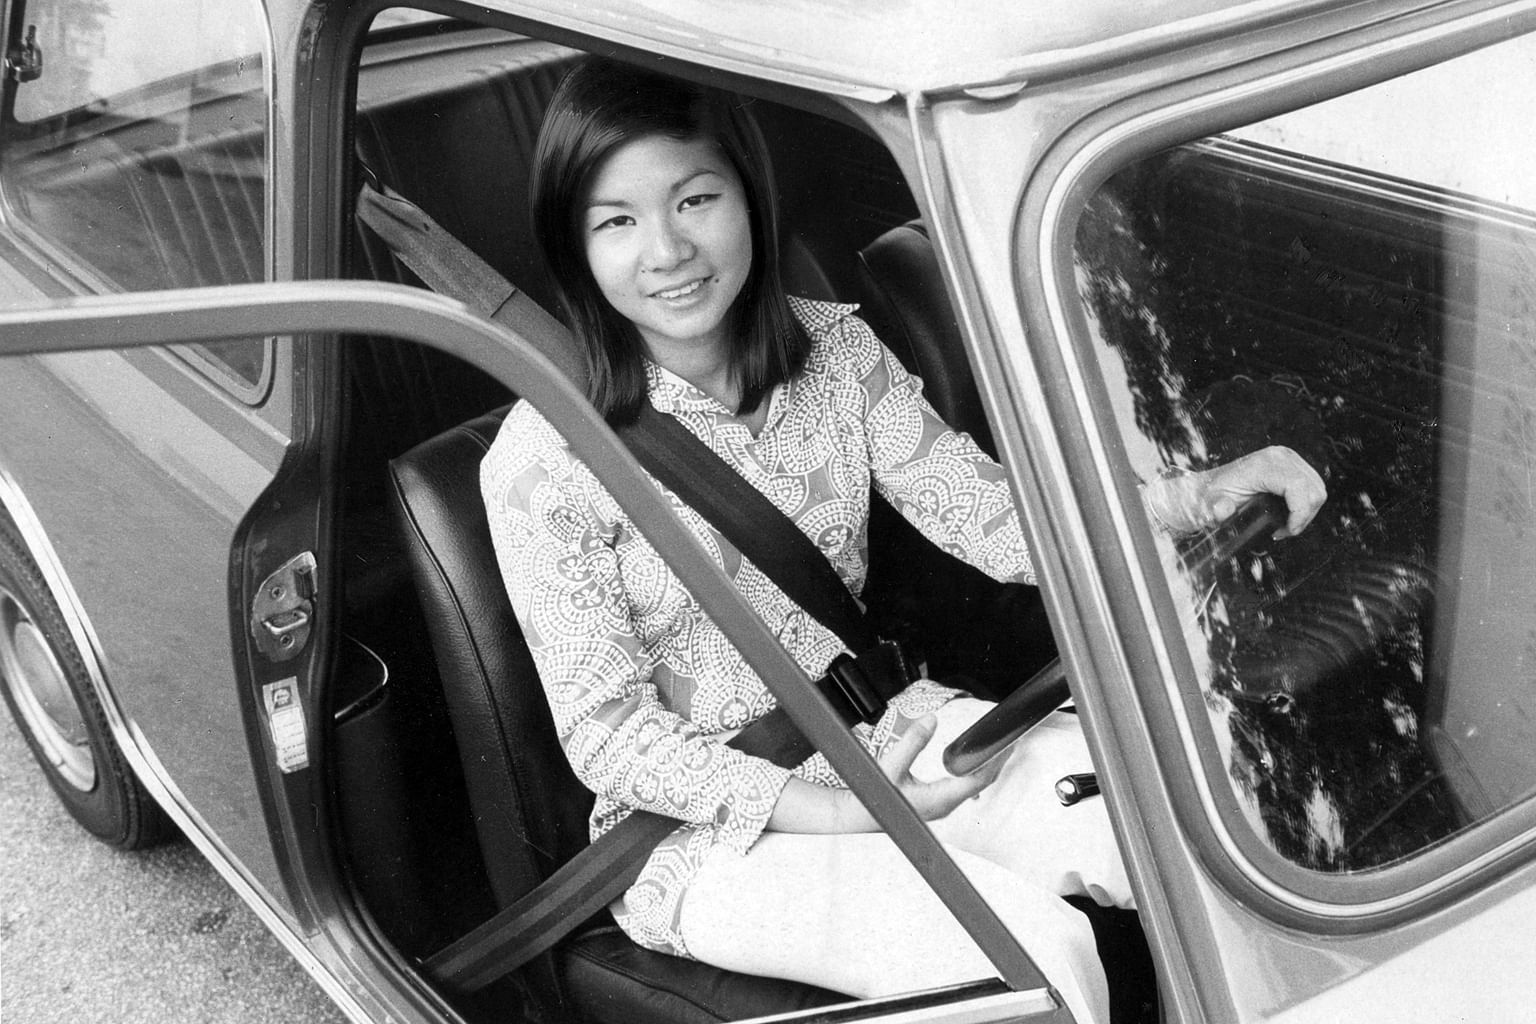 This photo taken in April 1965 shows a motorcar race at the Grand Prix event in Singapore, which was then known as the Malaysia Grand Prix. To Mr Lee Chiu San, riding a motorbike is about conquering fears. Mrs Anne Wong Holloway was one of the few wo